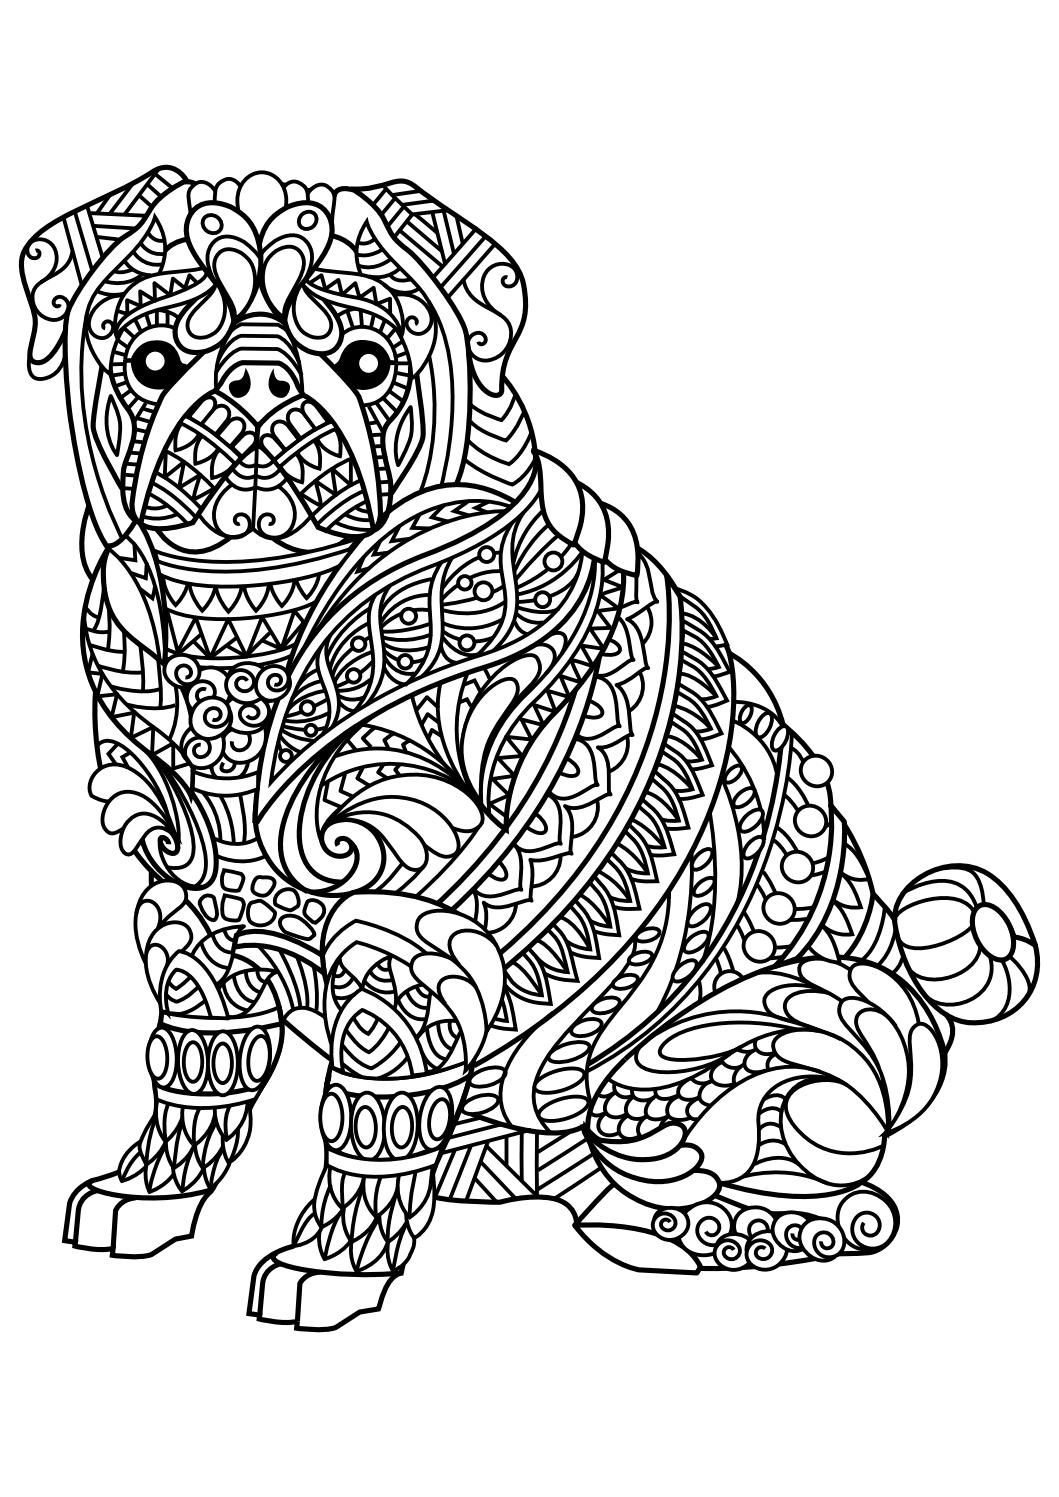 Animal Coloring Pages Pdf | Coloring - Animals | Dog Coloring Page - Free Printable Animal Coloring Pages